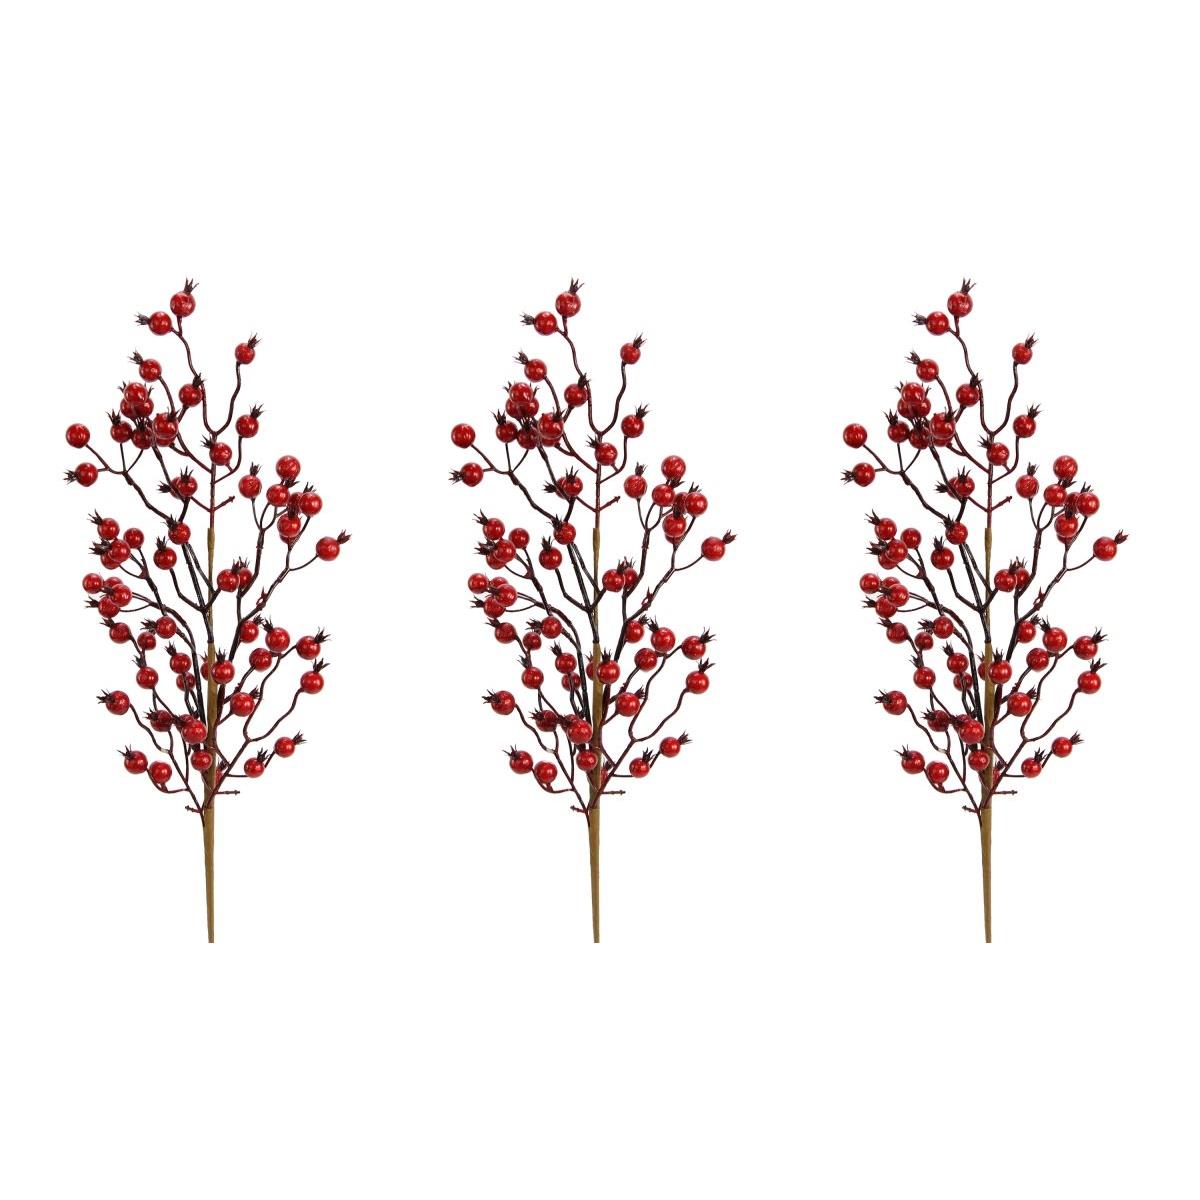 24 In. Faux Red Berry Spray Christmas Decor - Set Of 3